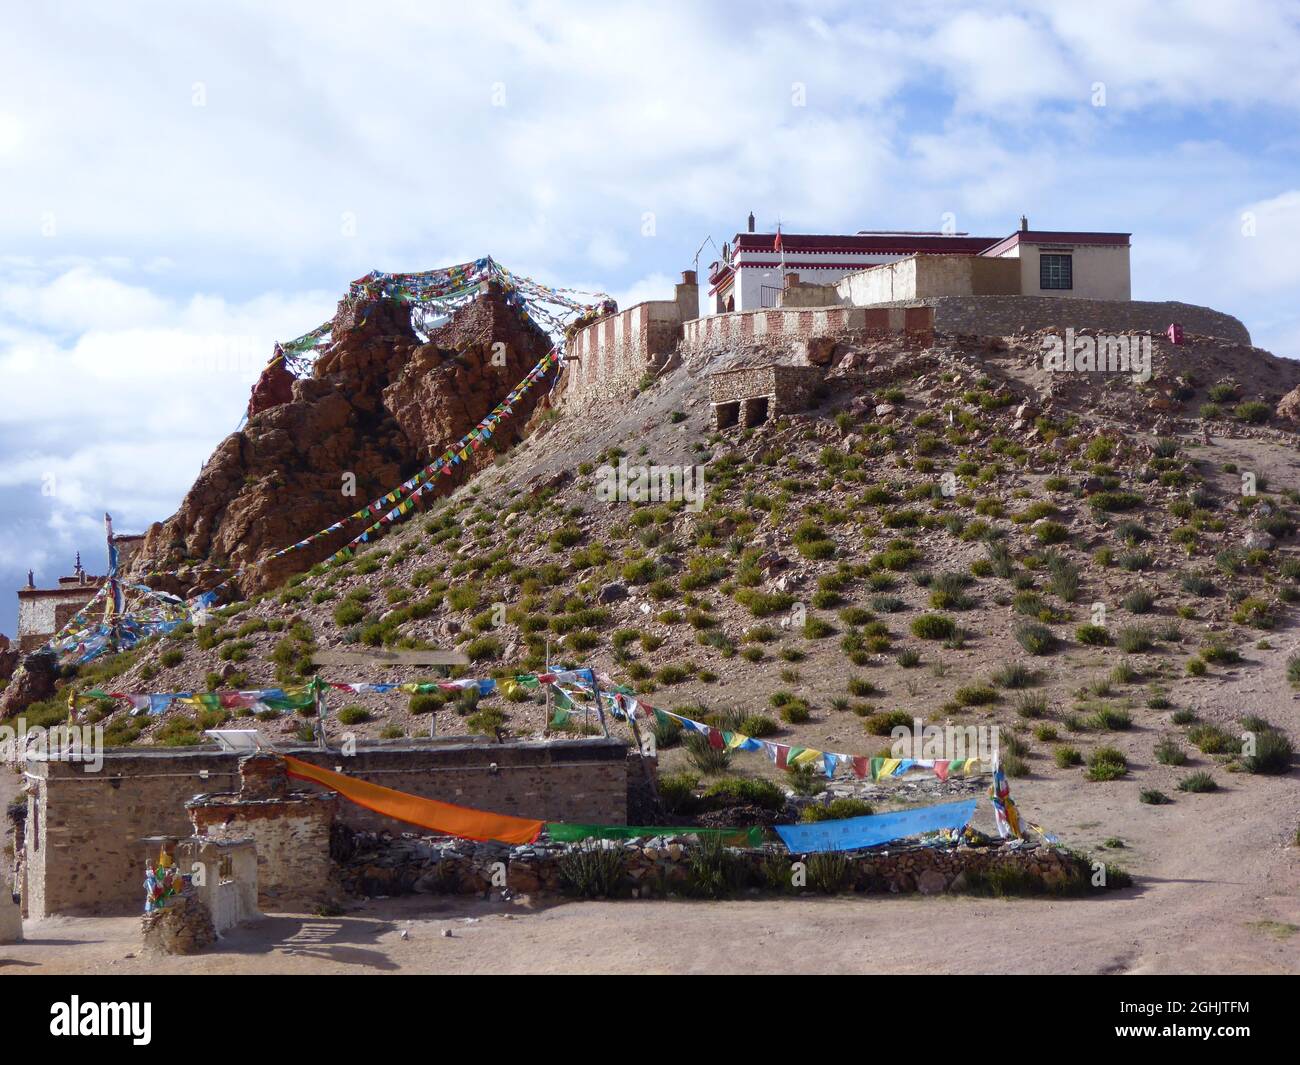 Chiu Gompa, a small Tibetan monastery on the cliffs of a steep red-colored hill by Lake Manasarovar, near Darchen, Mt Kailash base, Tibet Stock Photo